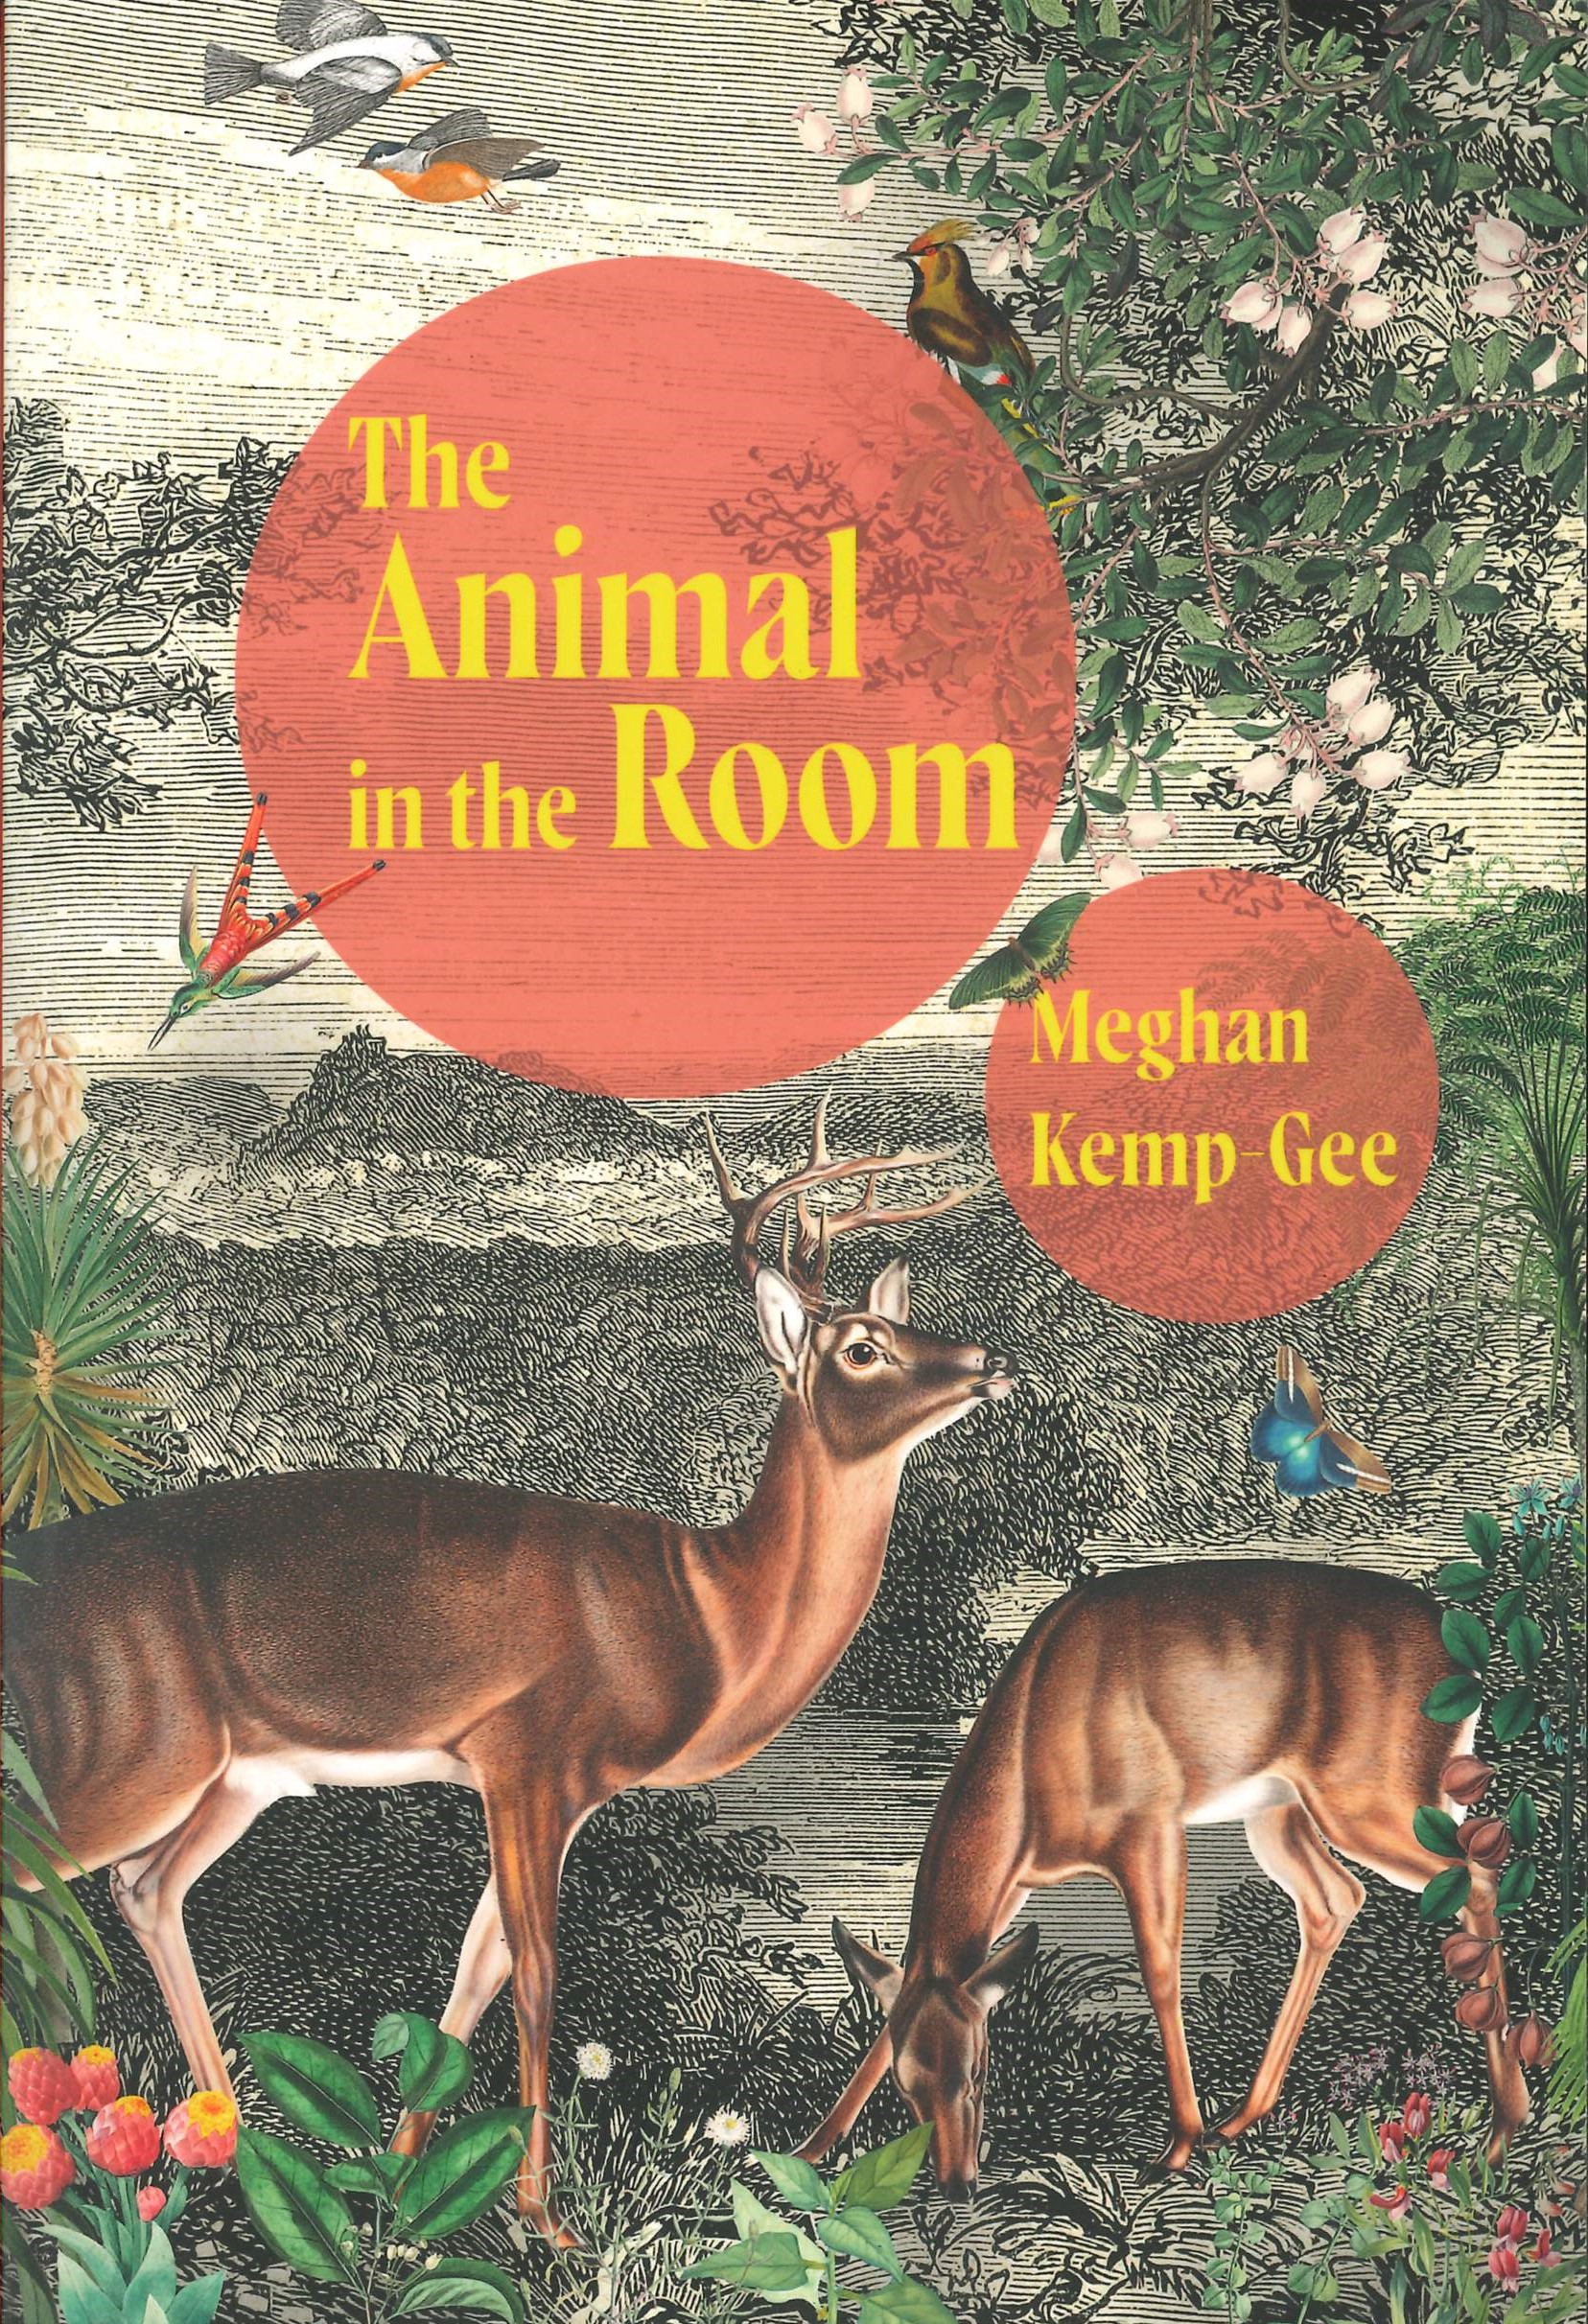 The Animal in the Room